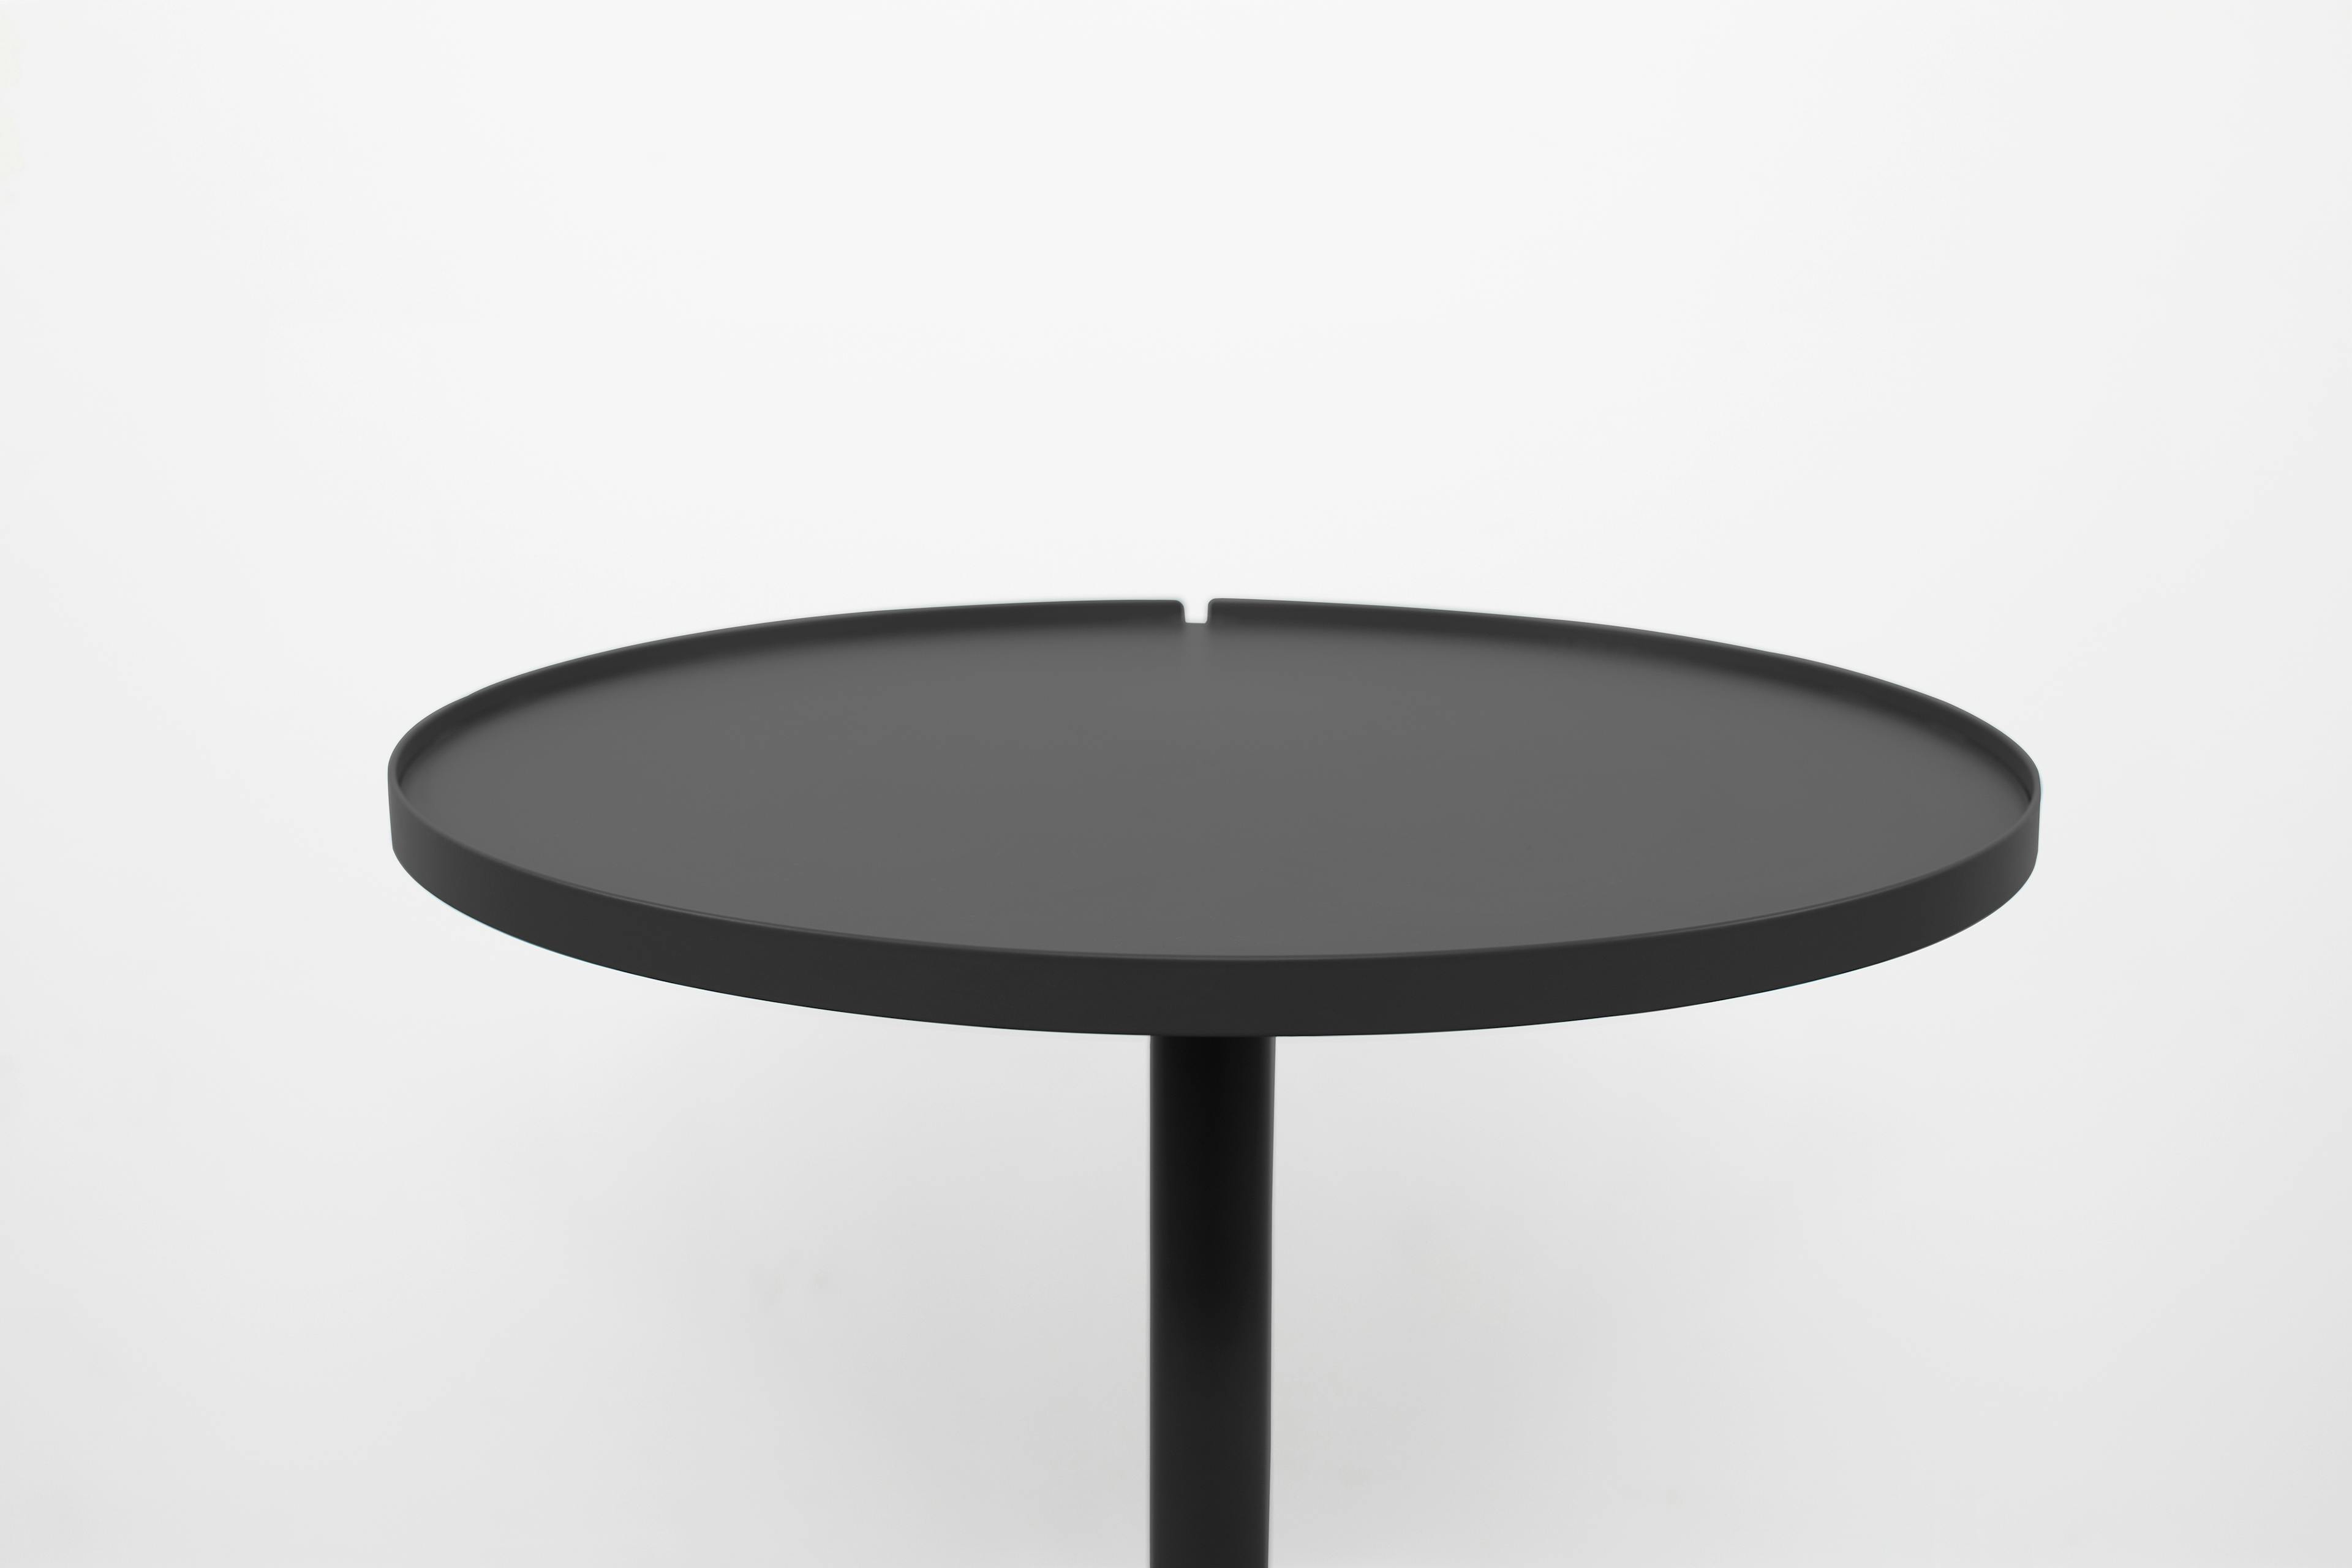 The Side Table in Matte Black, Perfect for Bedroom or Living Room Decor